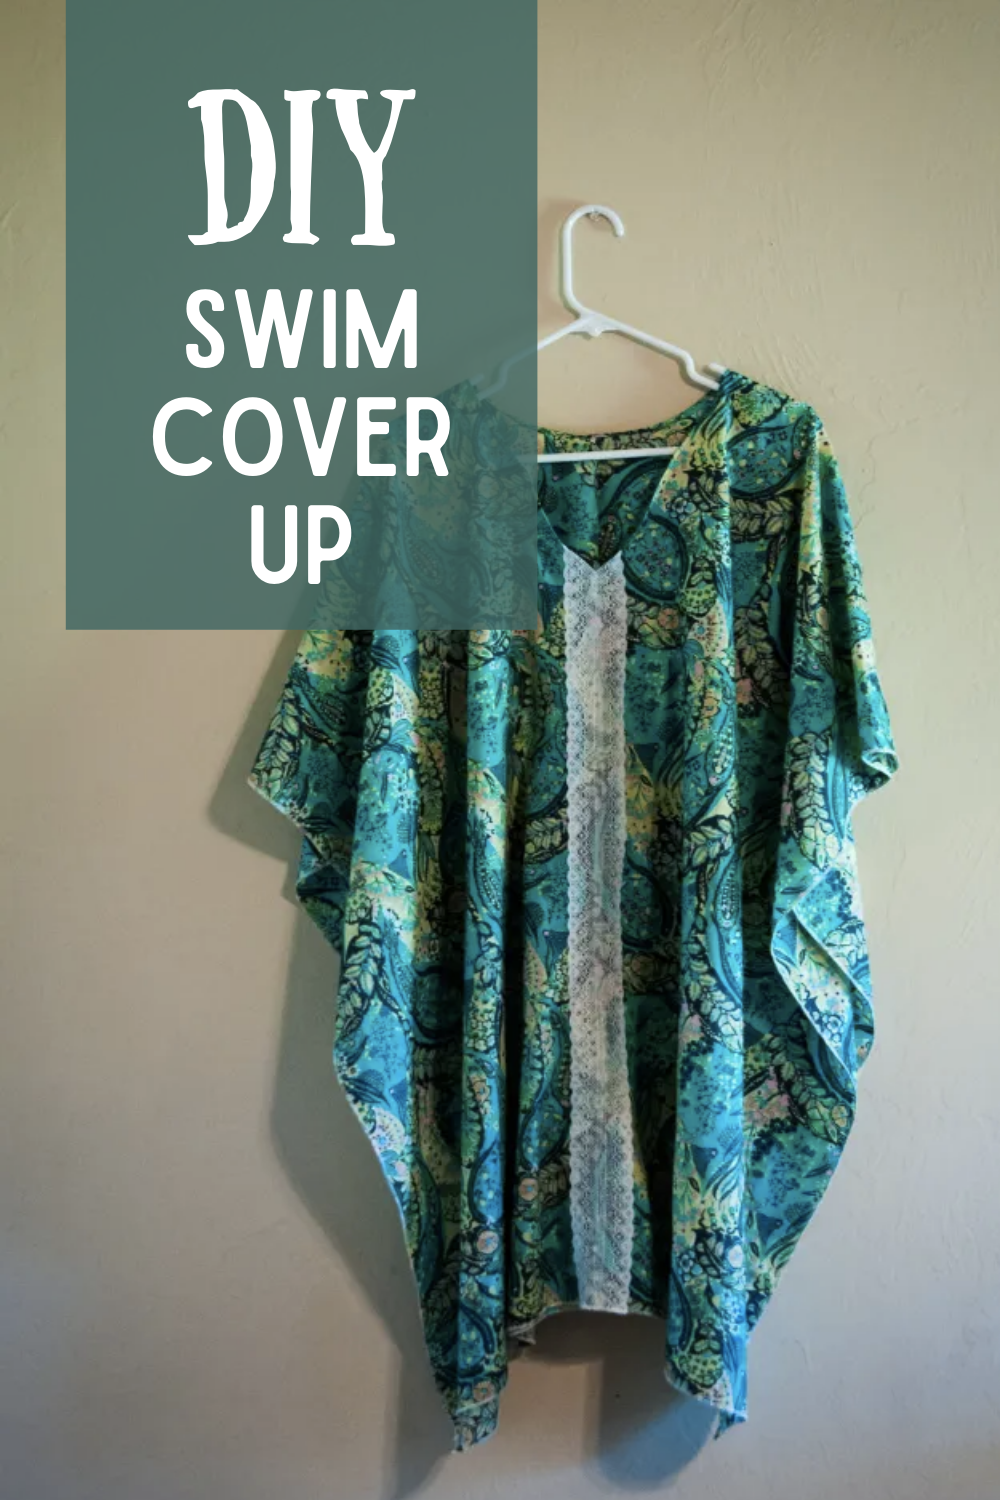 DIY Swim Cover Up | Ideas For Women And Girls